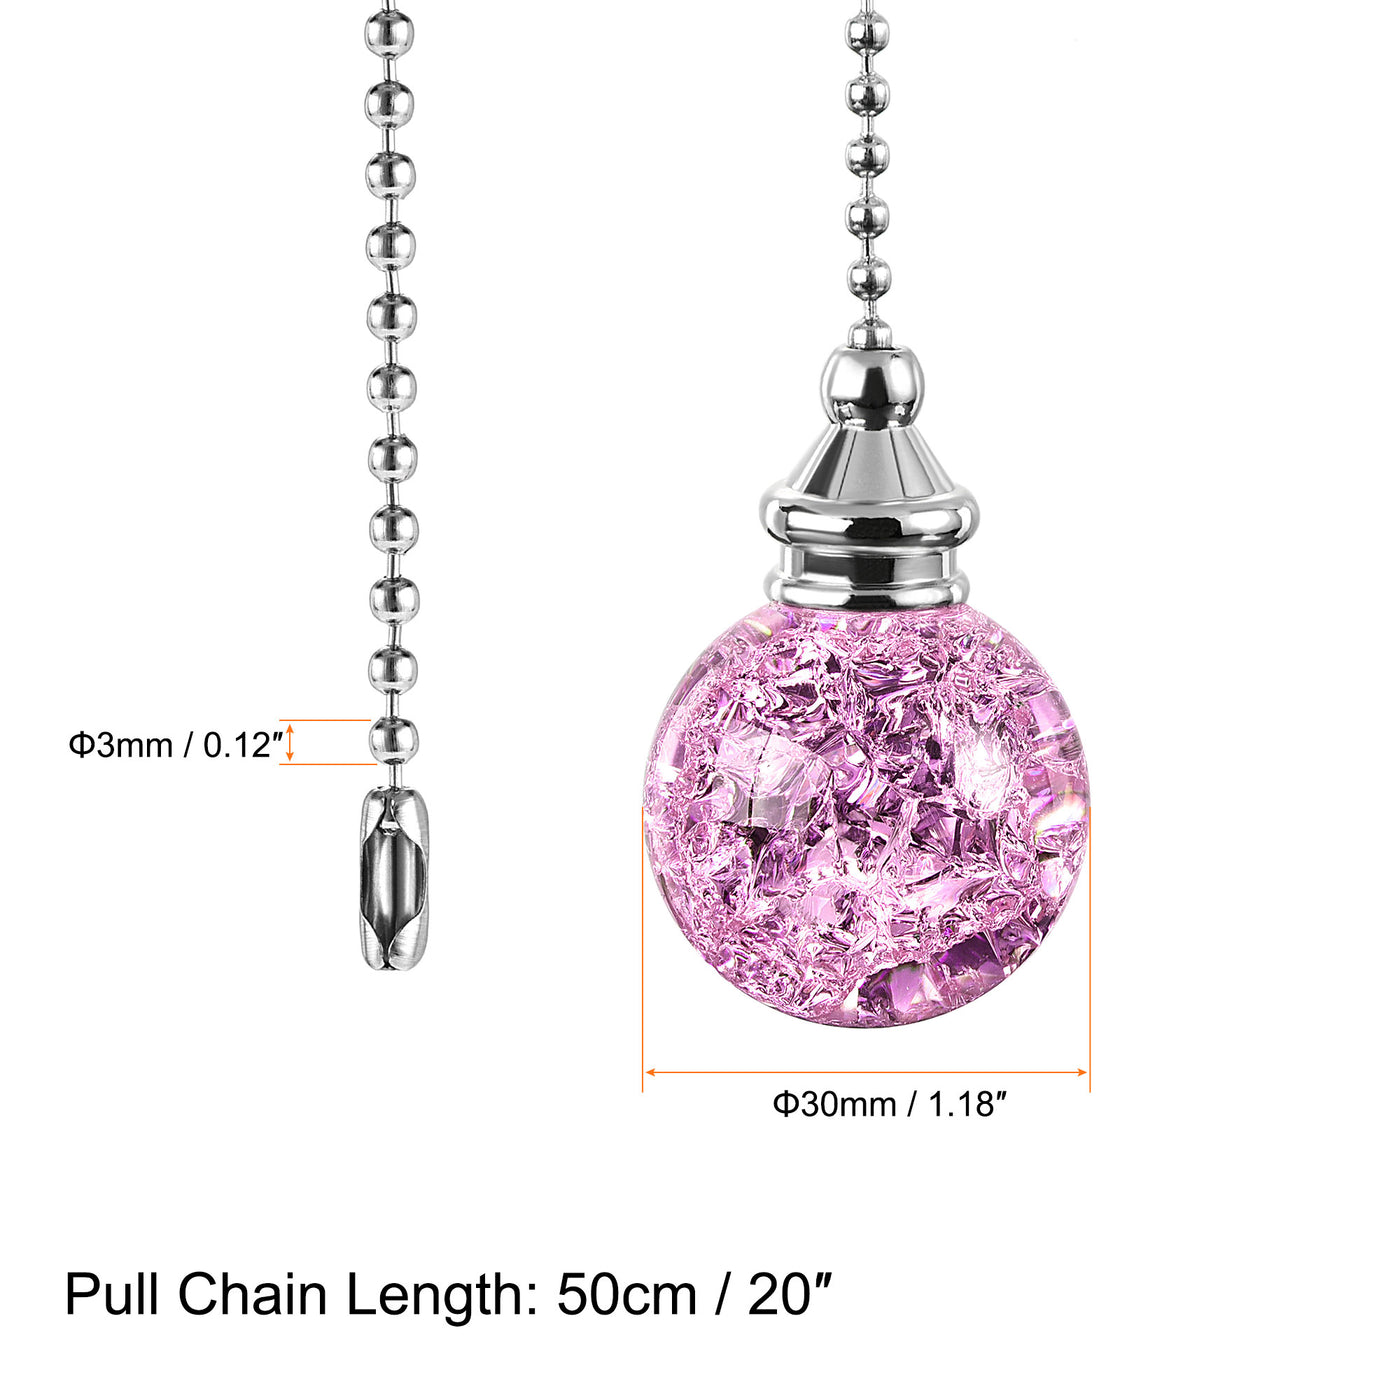 uxcell Uxcell 20 Inch Ceiling Fan Pull Chain, Decorative Crystal Fan Pull Chain Ornament Extension, 3mm Diameter Beaded 30mm Ice Cracked Ball Pendant, Pink